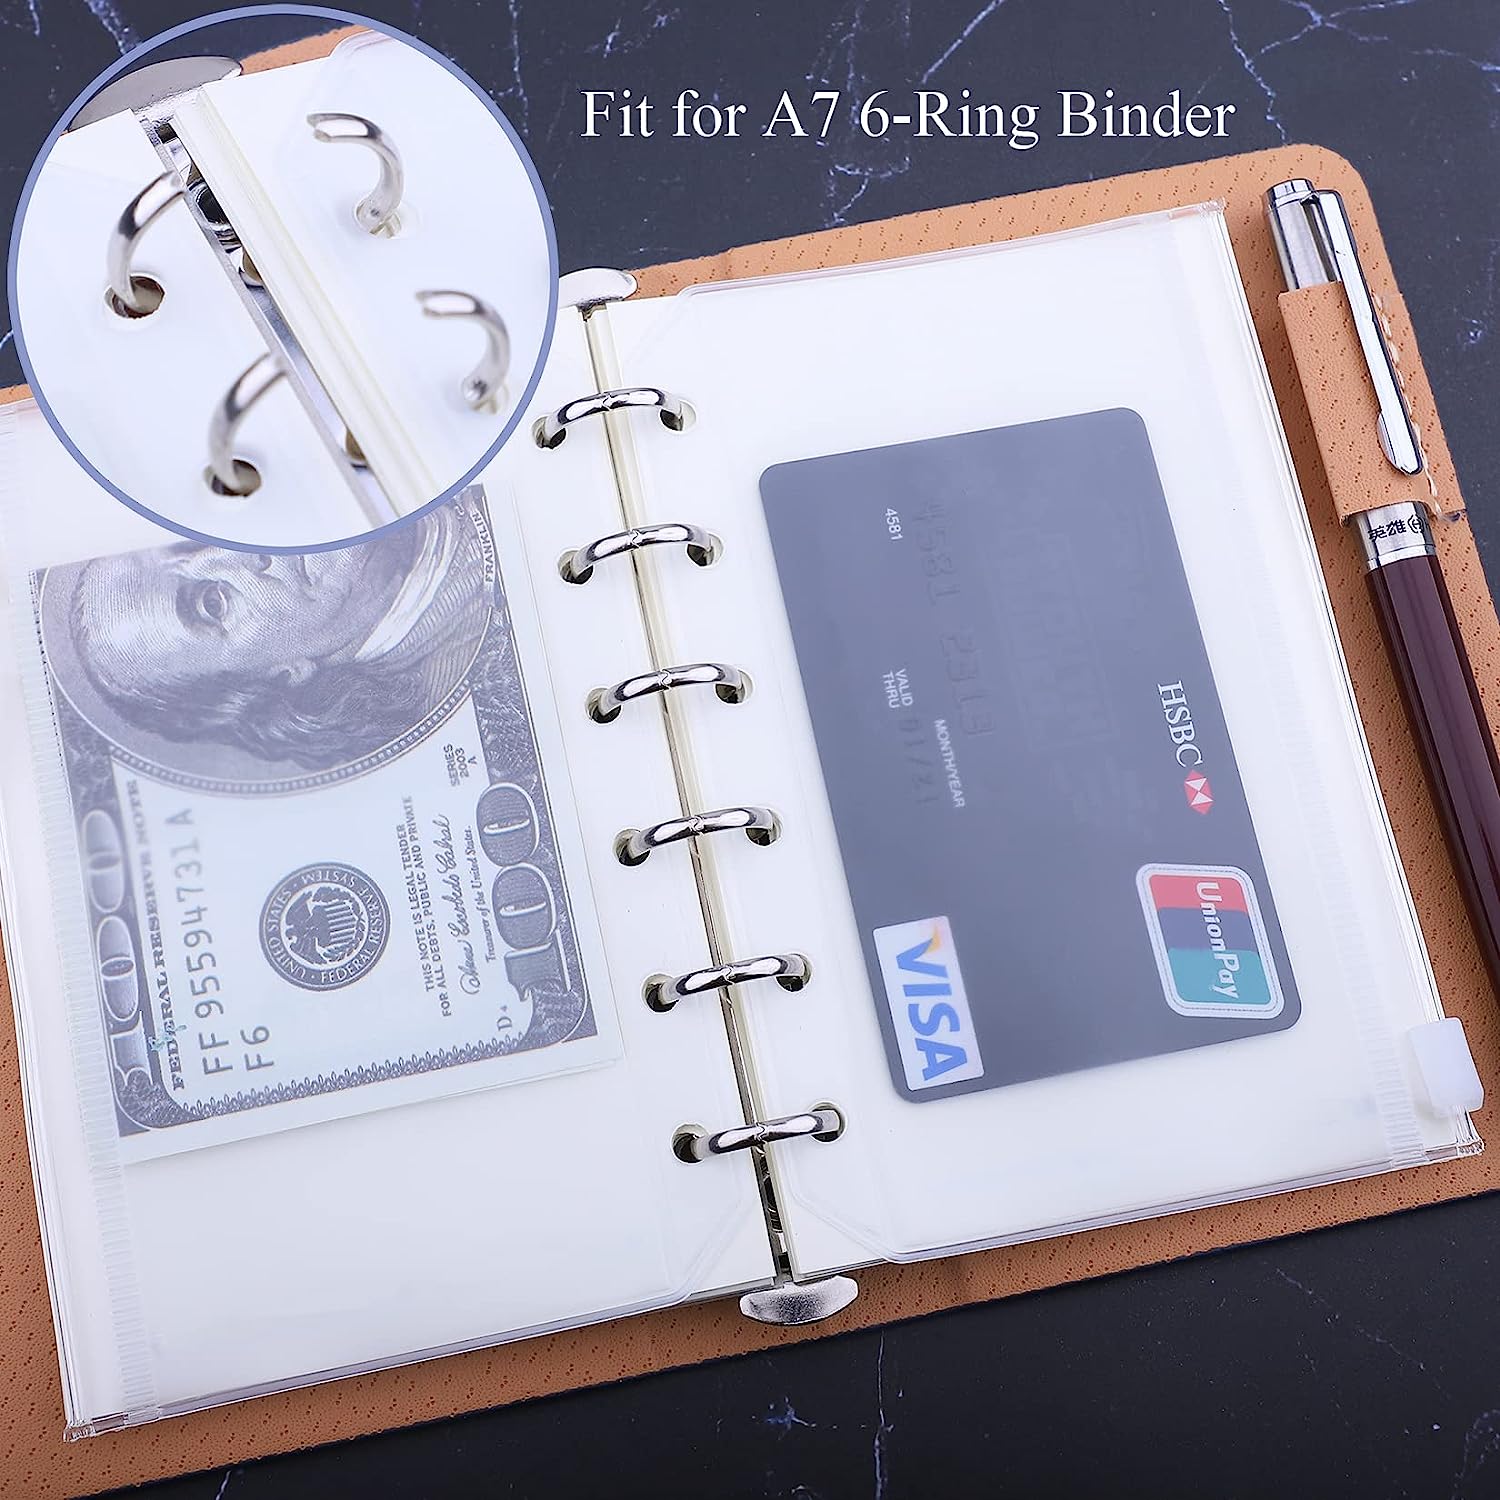 Classeur Budget a6 Enveloppe Budget Leather 6 Hole Ring Binder